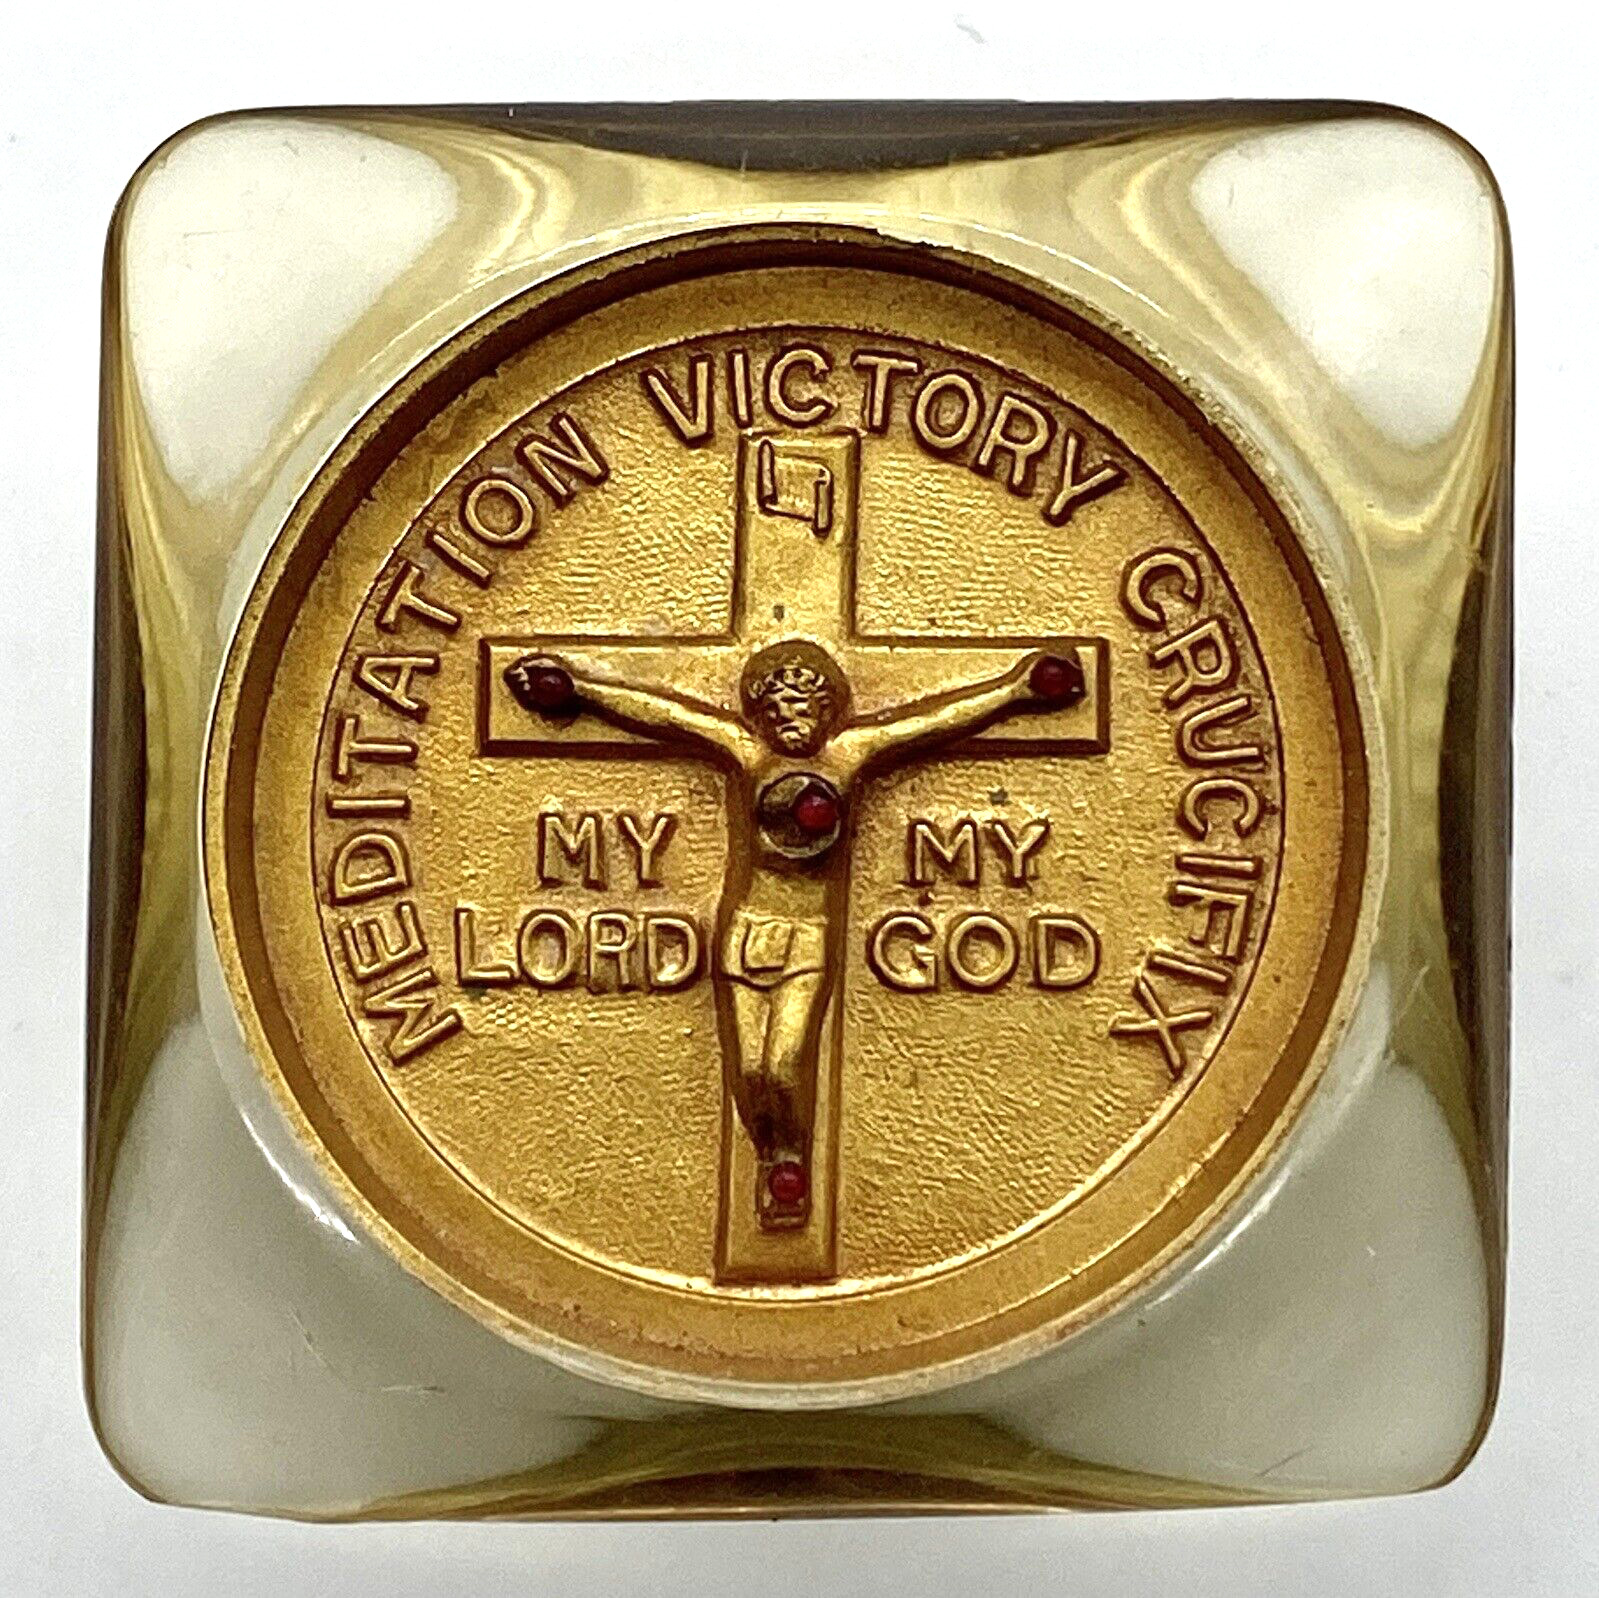 Vintage Meditation Victory Crucifix Pocket Token My Lord My God Gold Clear Resin